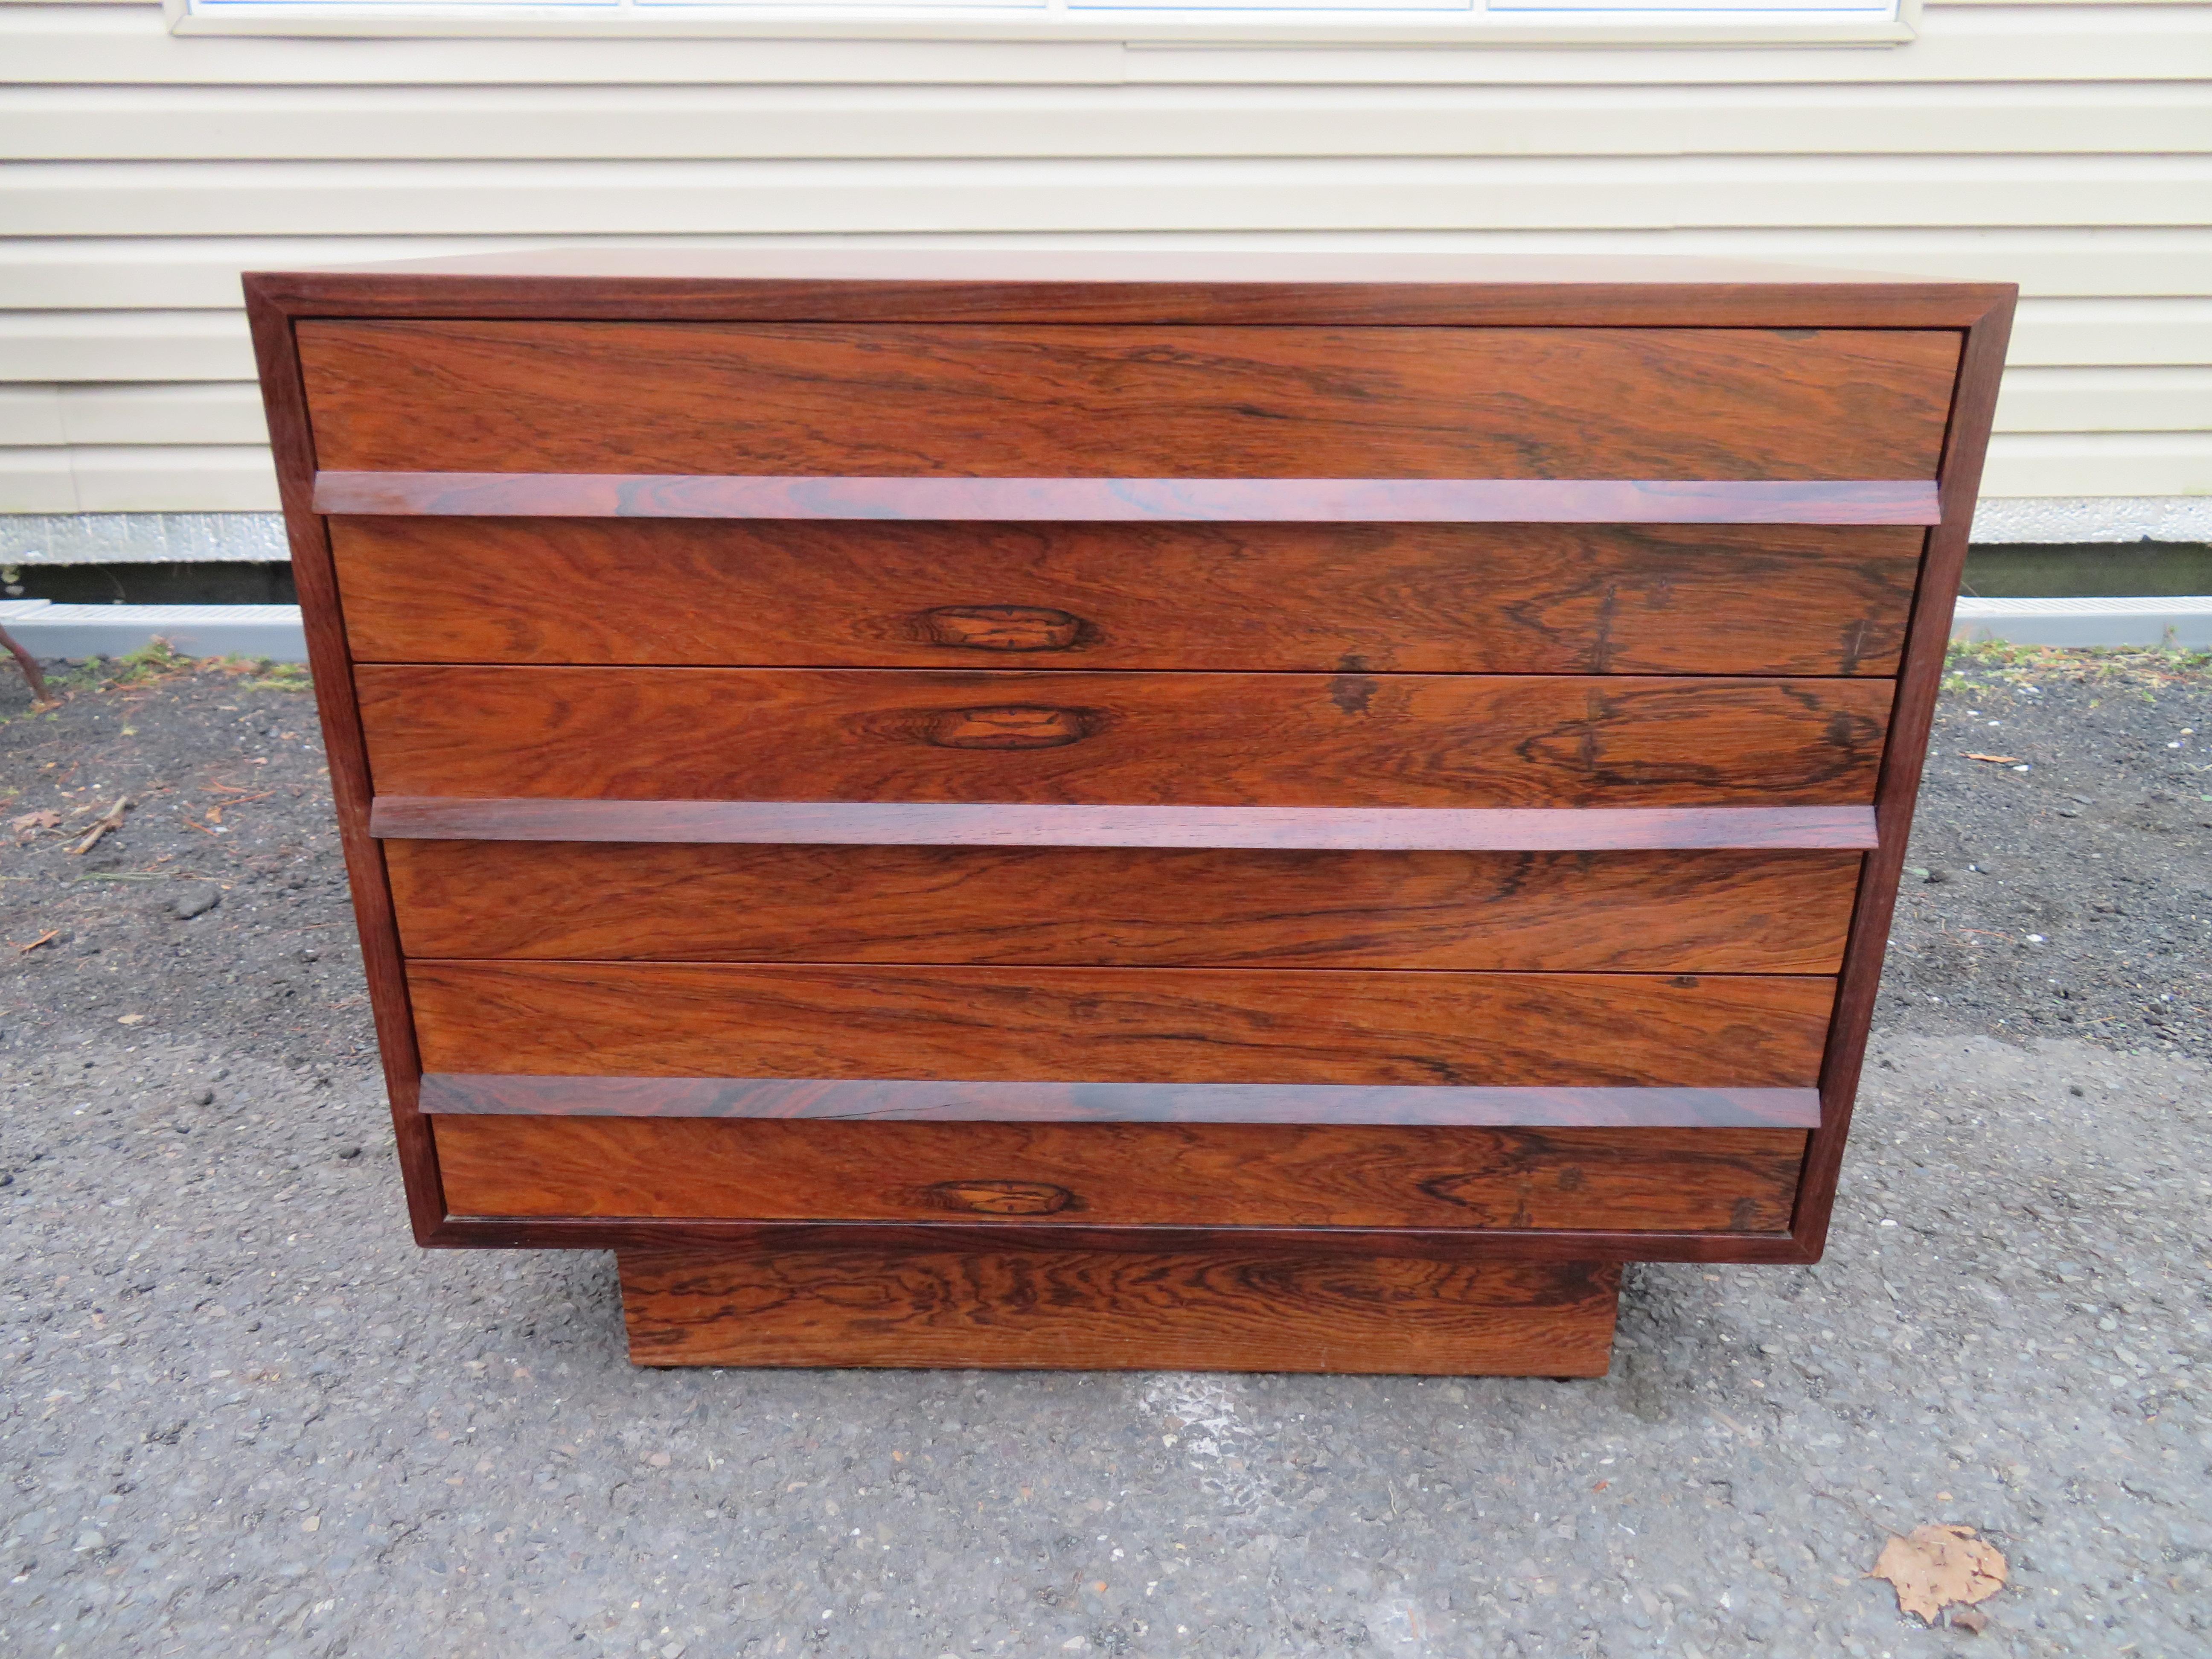 Lovely petite Danish modern rosewood bachelors chest. Rosewood veneer with solid rosewood handles. Perfectly matched drawer fronts and fully finished mahogany inside the drawers with a plinth base. Overall in excellent vintage condition with some